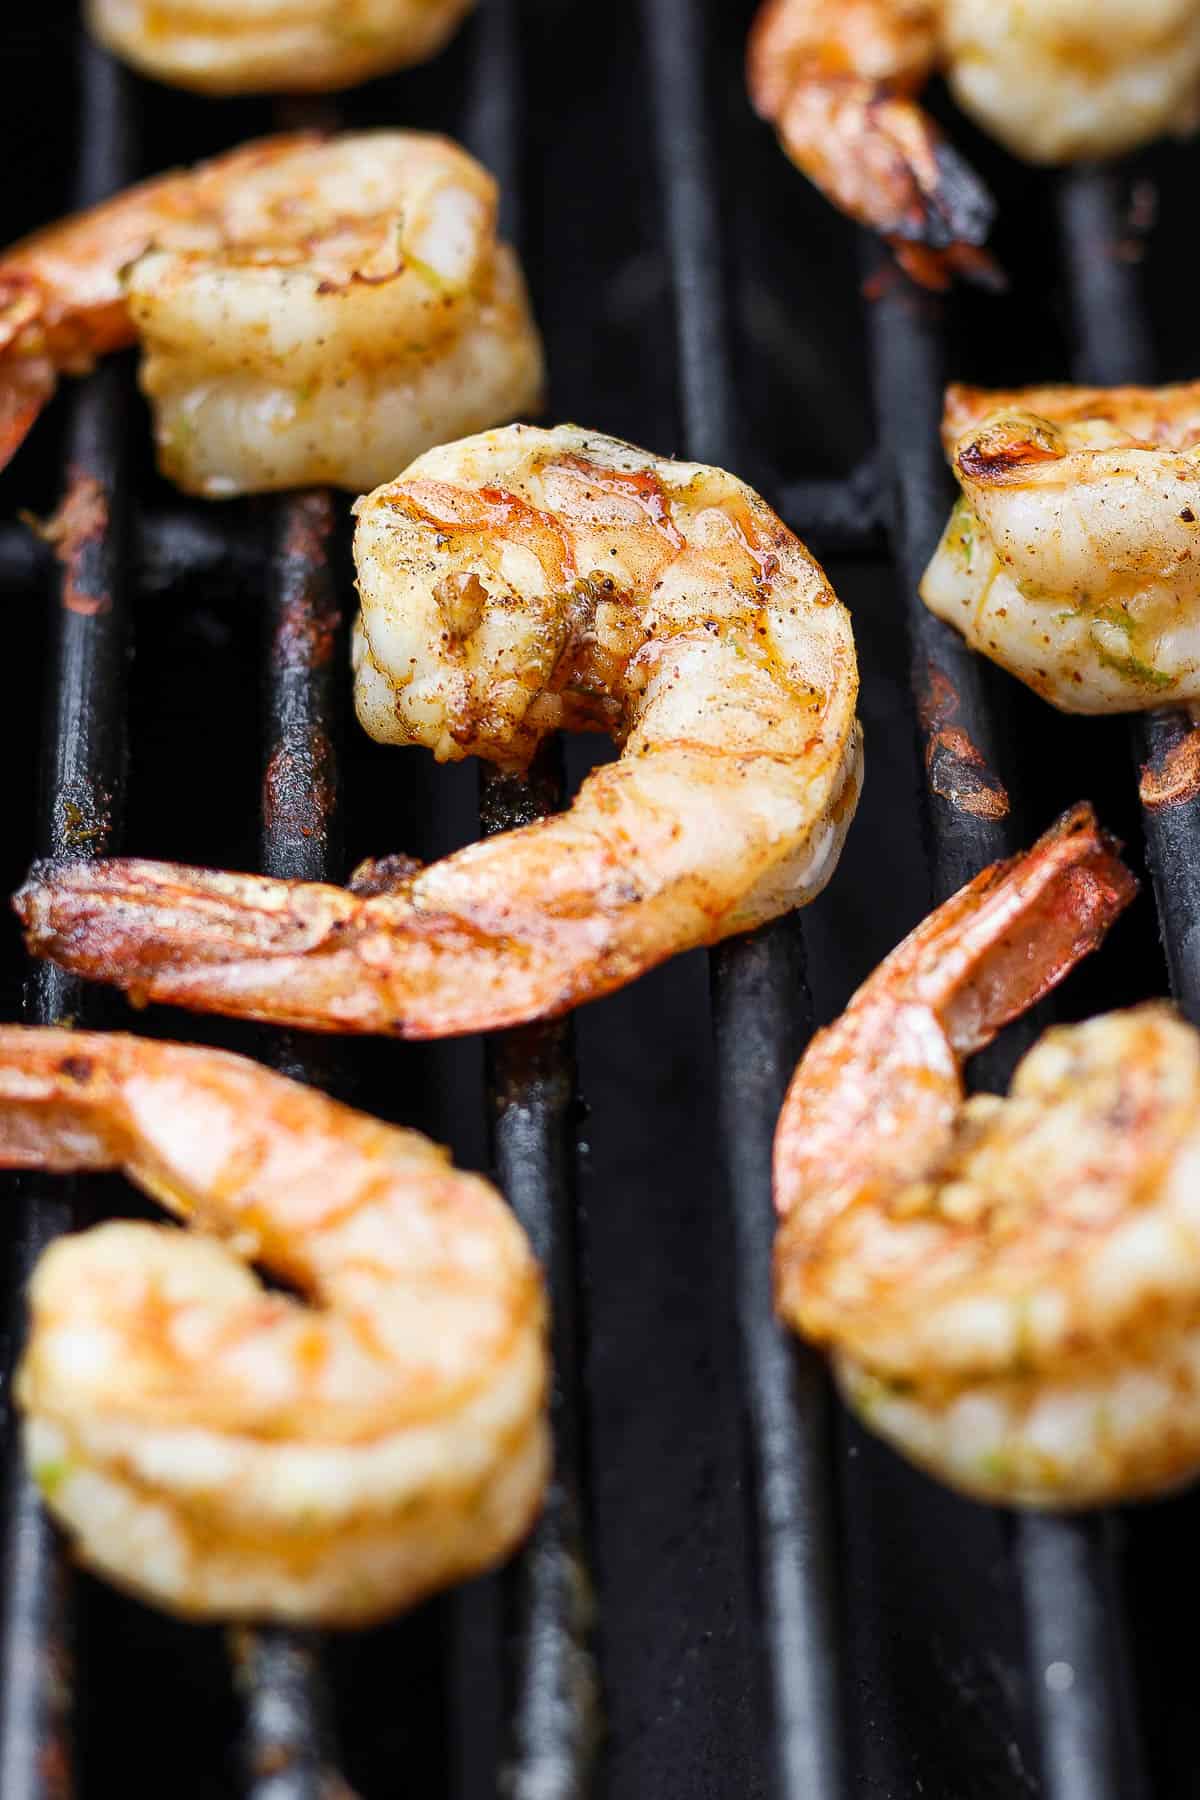 Chili lime shrimp cooking on the grill.